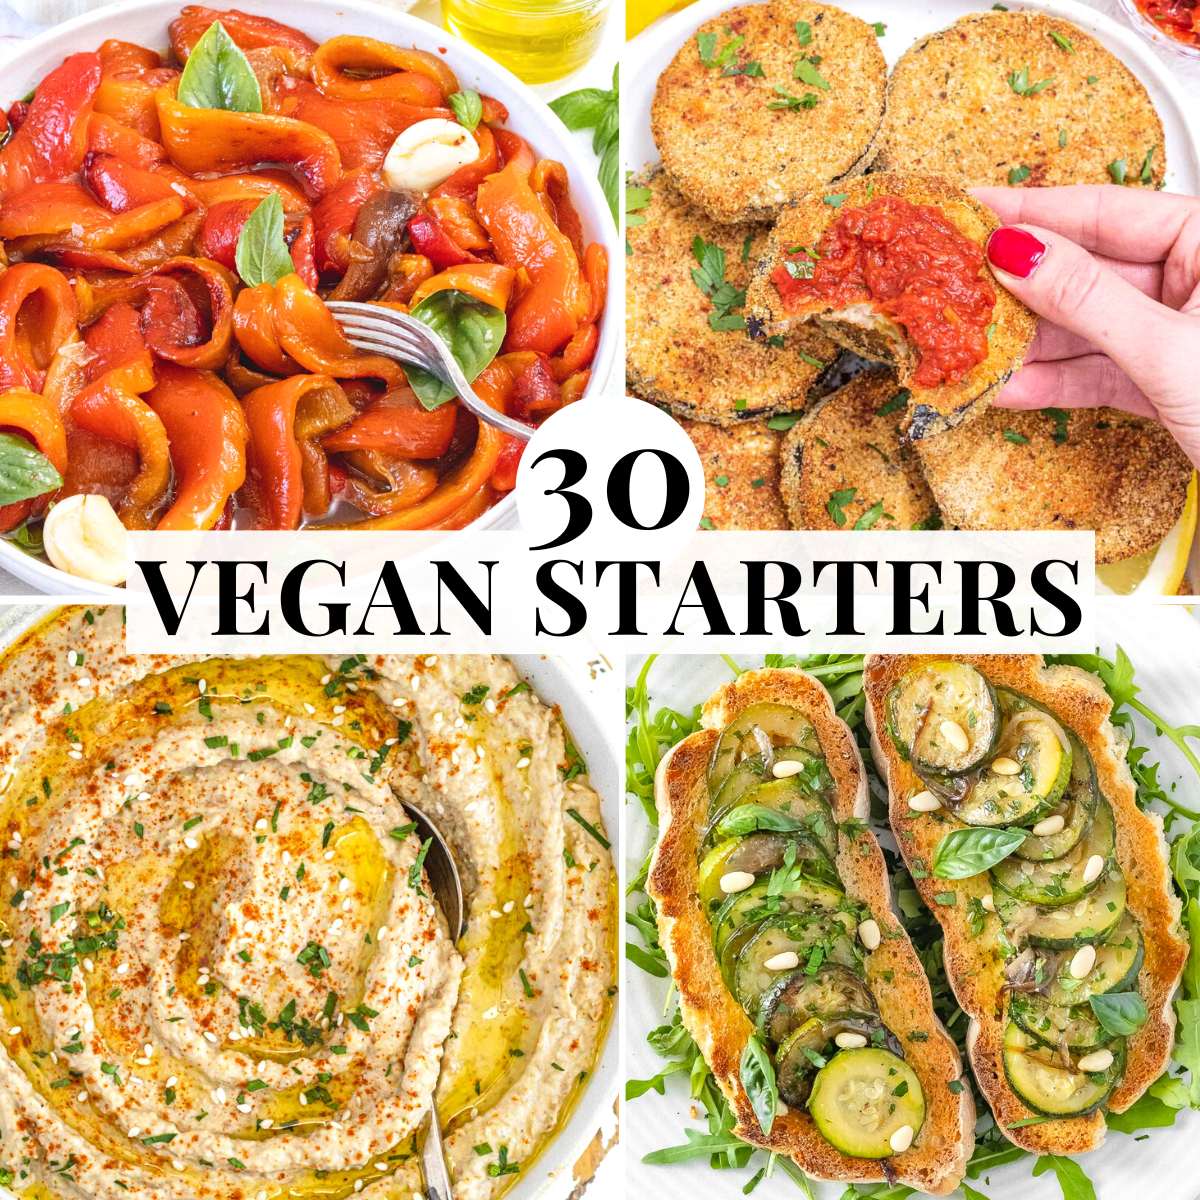 vegan starters with dips and vegetables